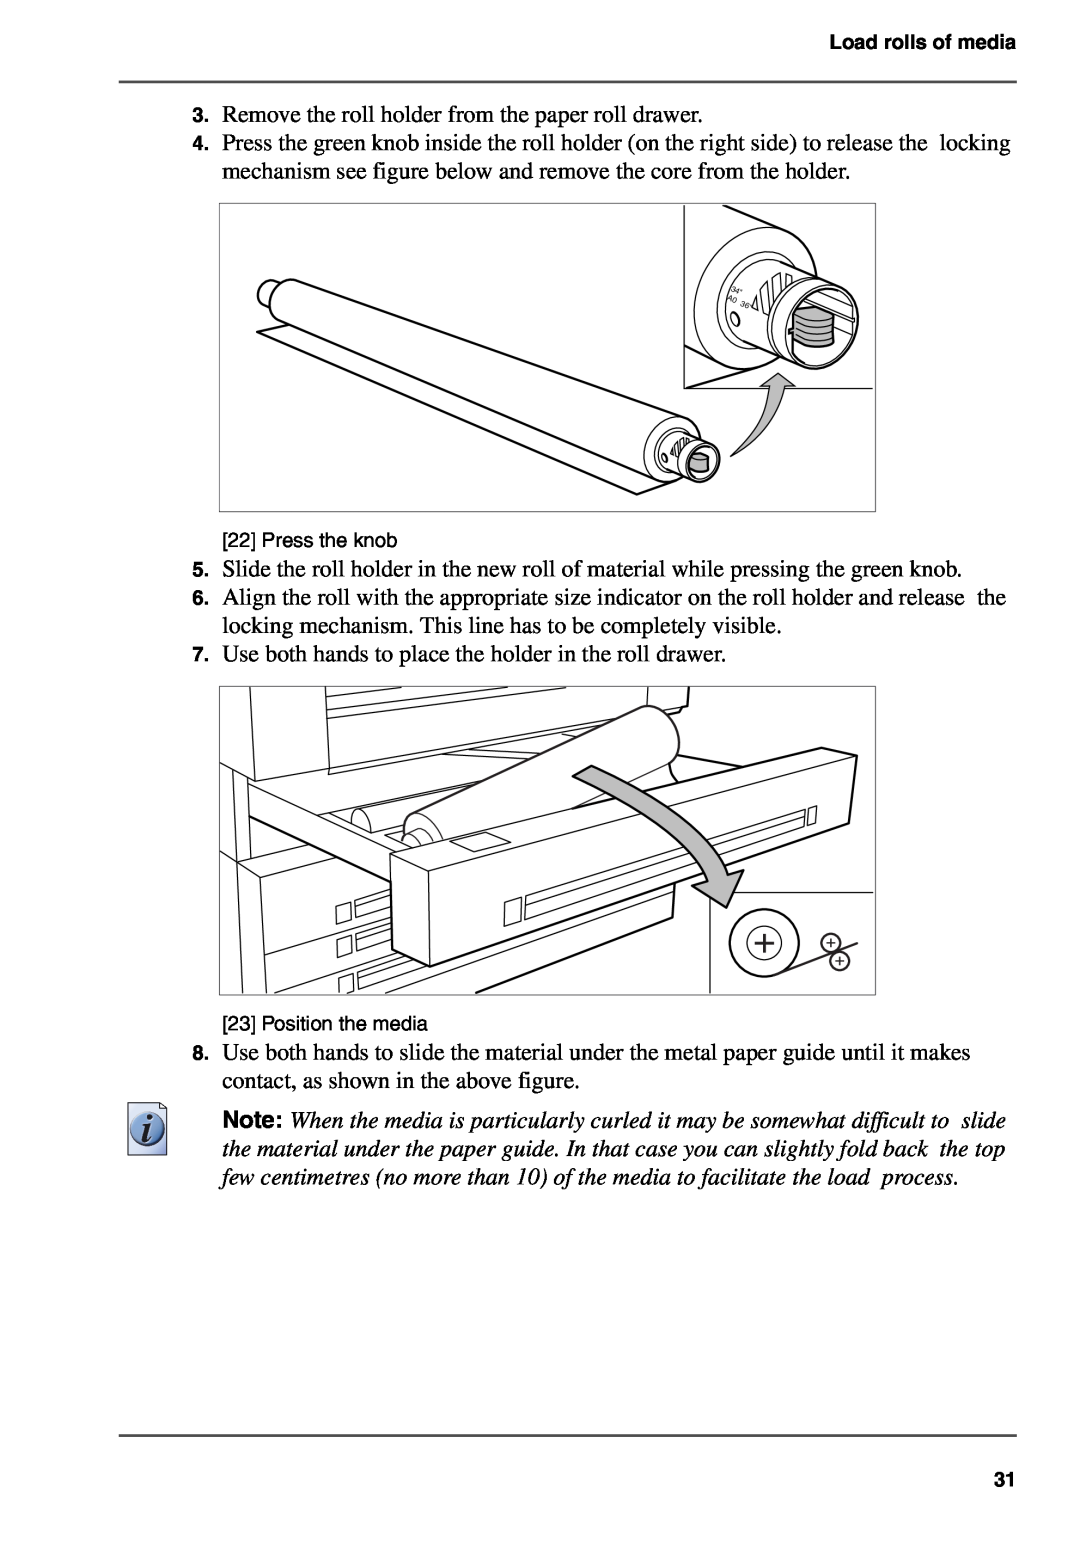 Oce North America TDS700 user manual Remove the roll holder from the paper roll drawer 